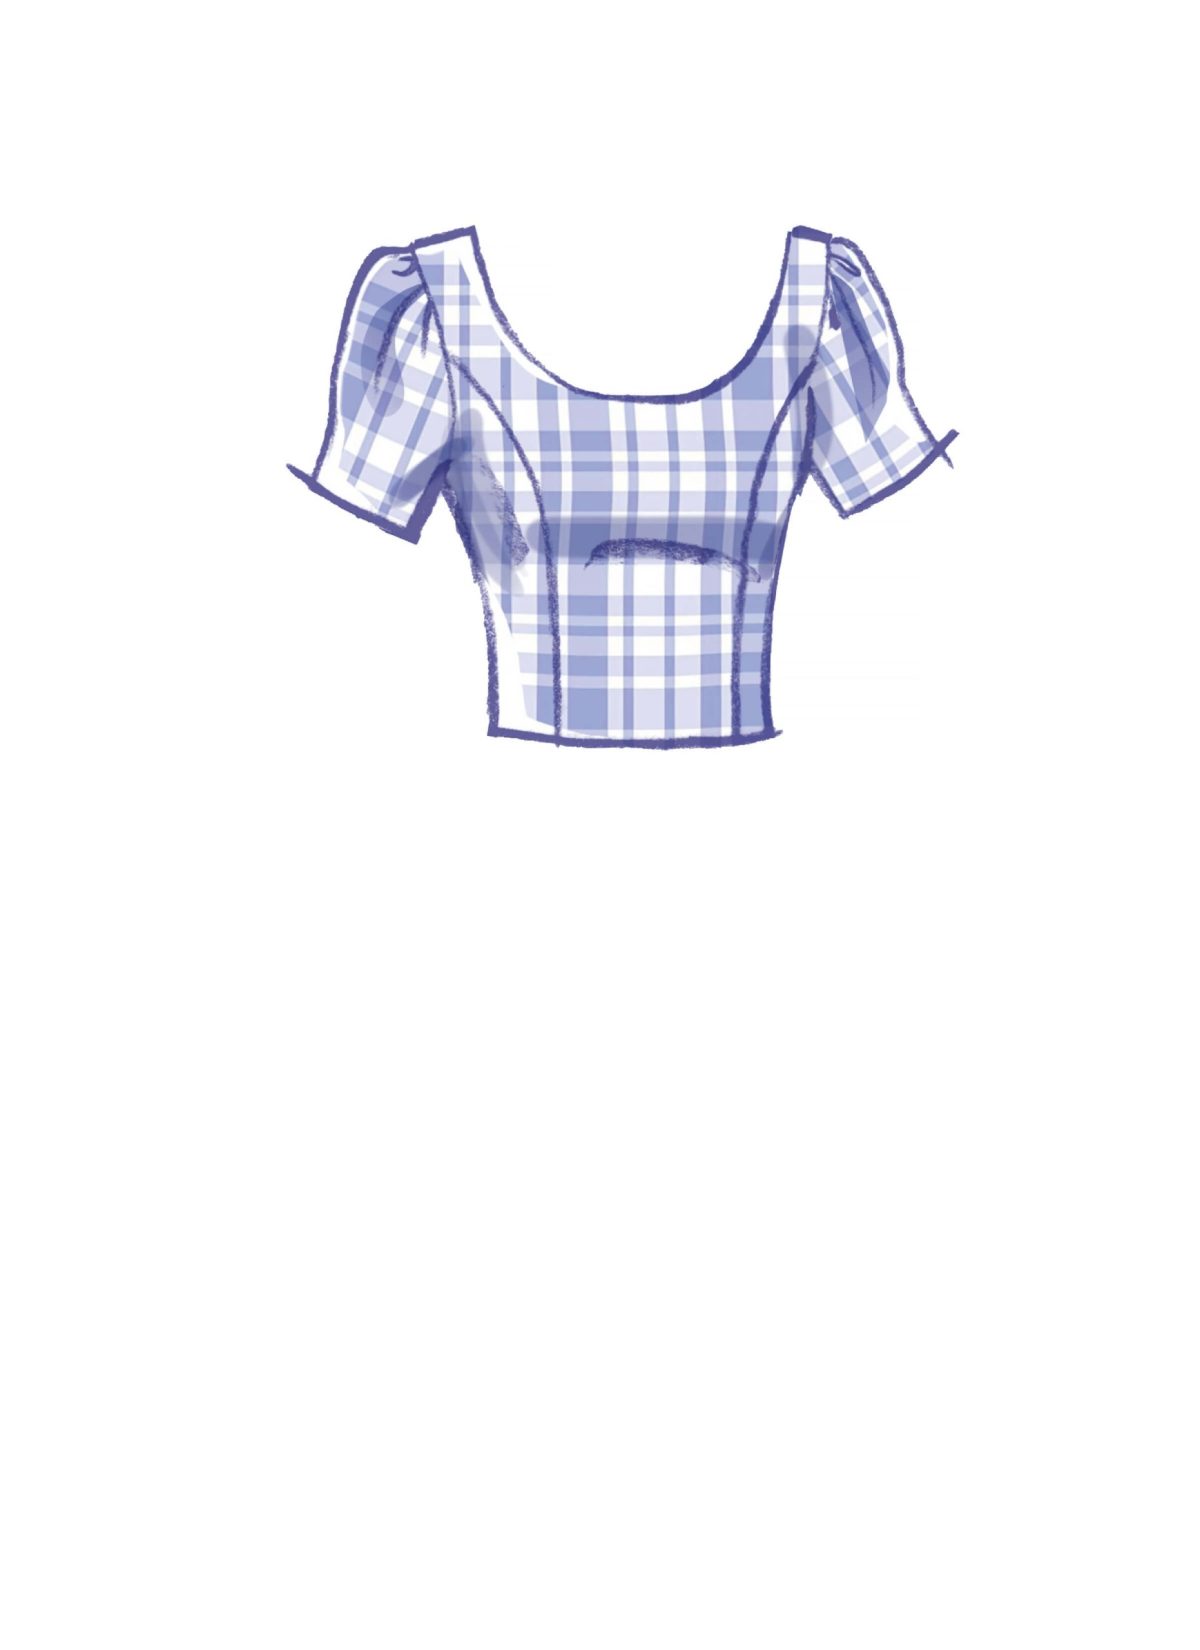 McCall's Sewing Pattern M8255 Misses' and Women's Tops